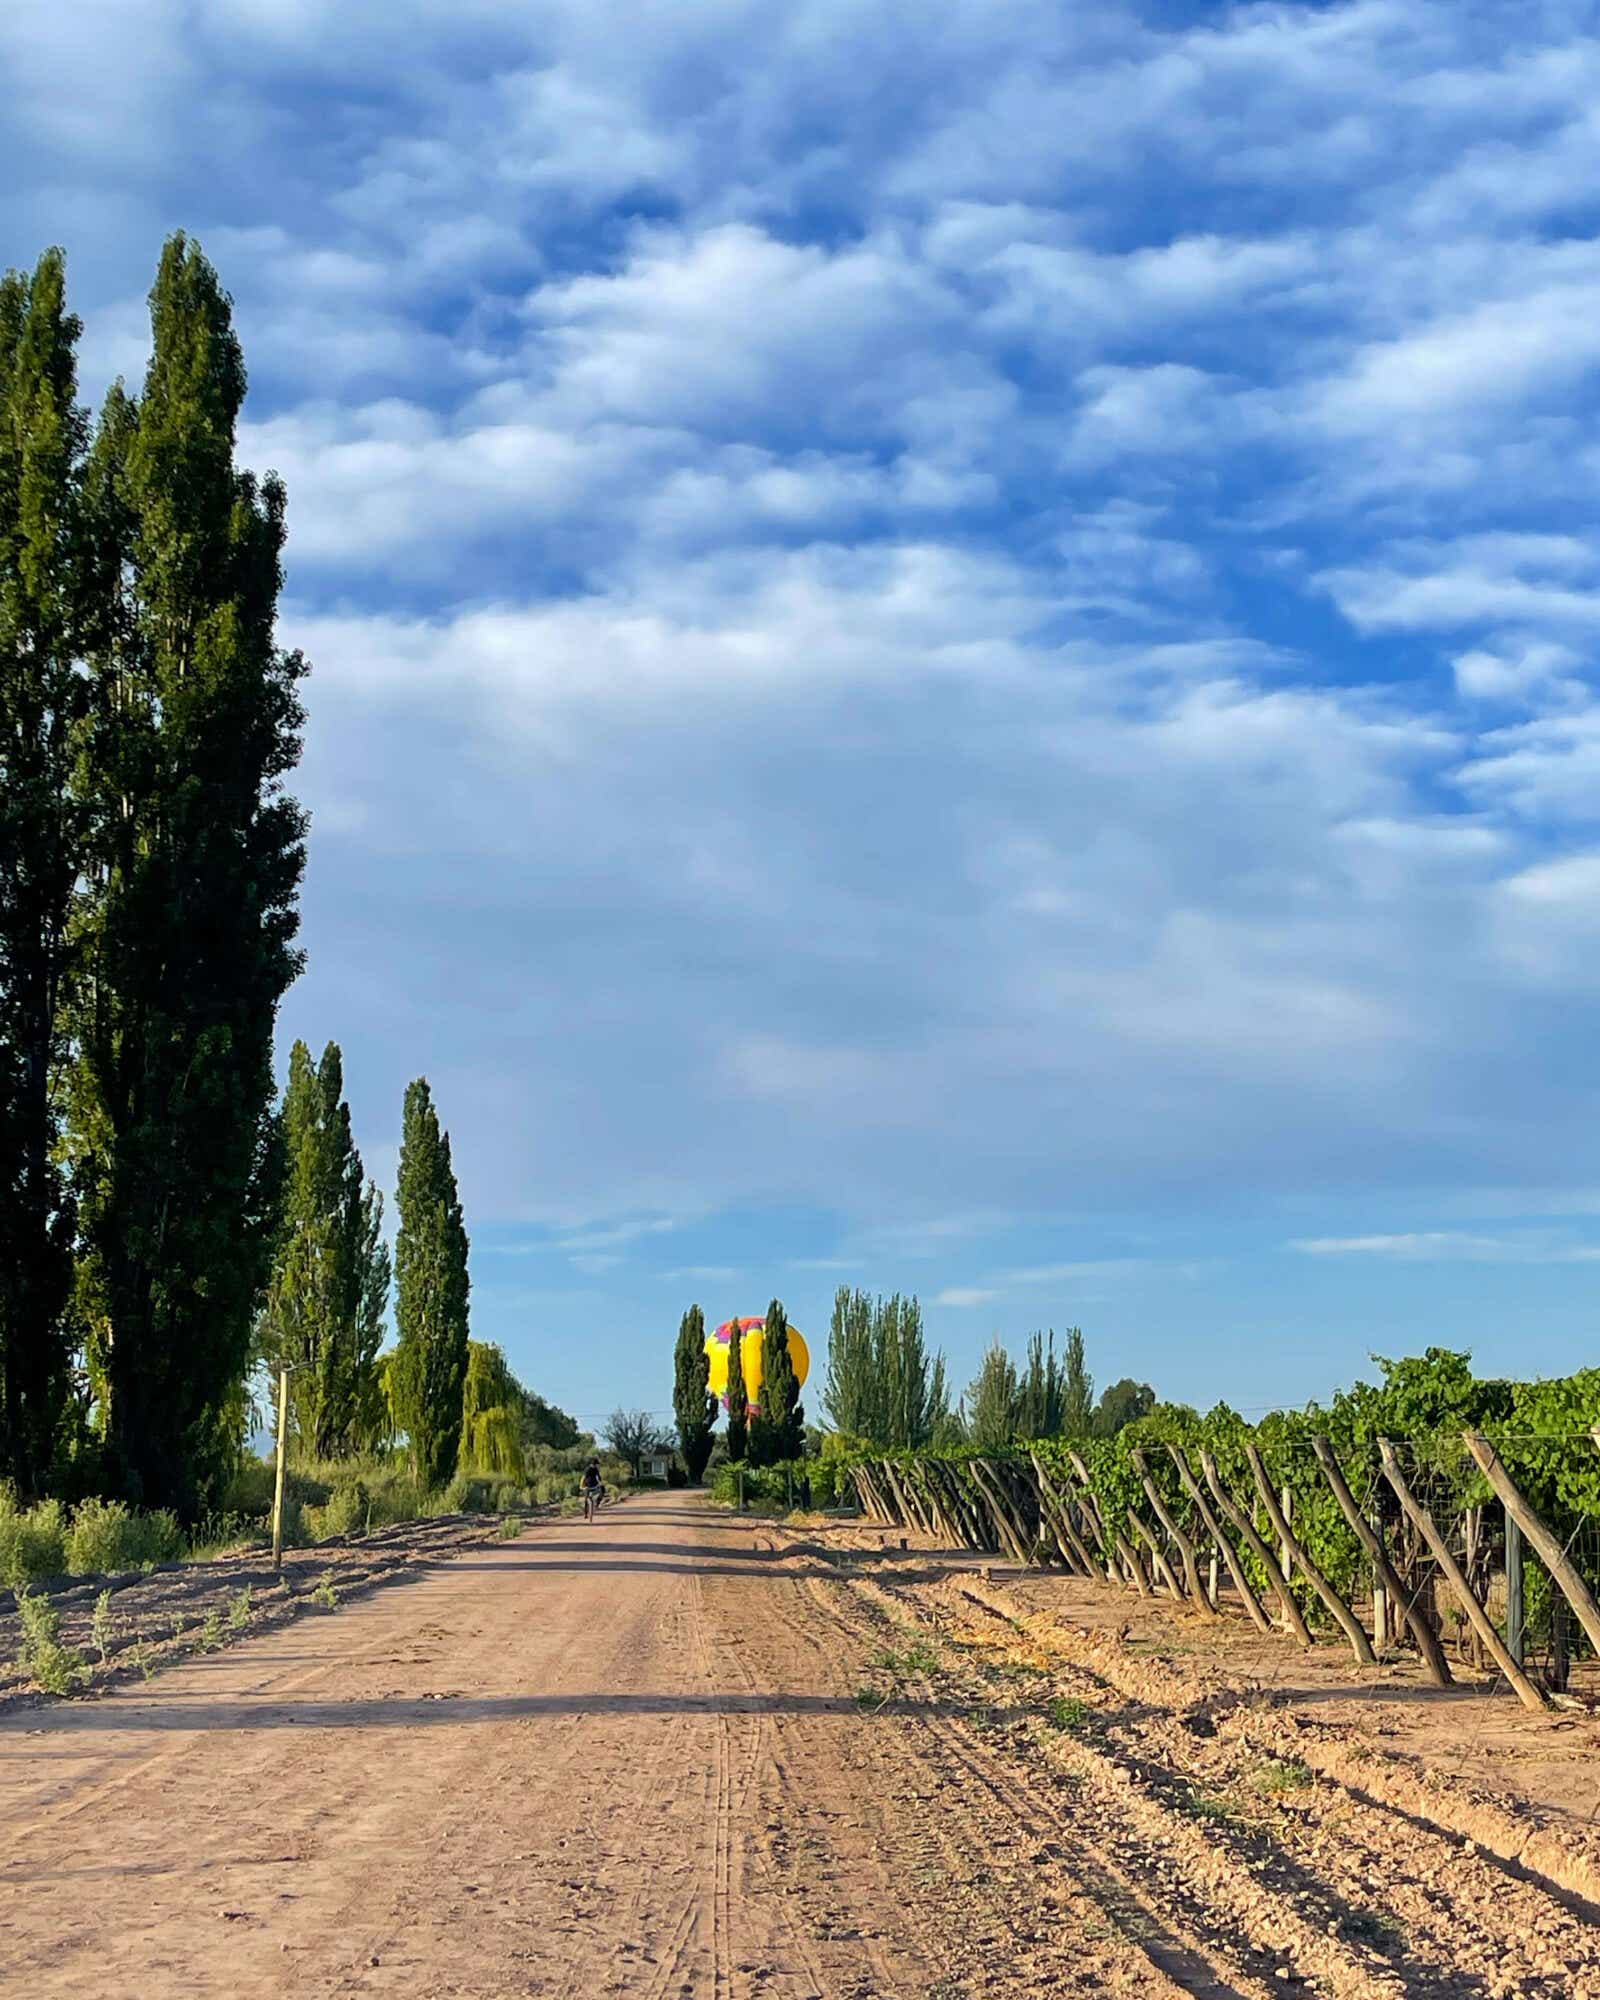 A field in Argentina with grape vines